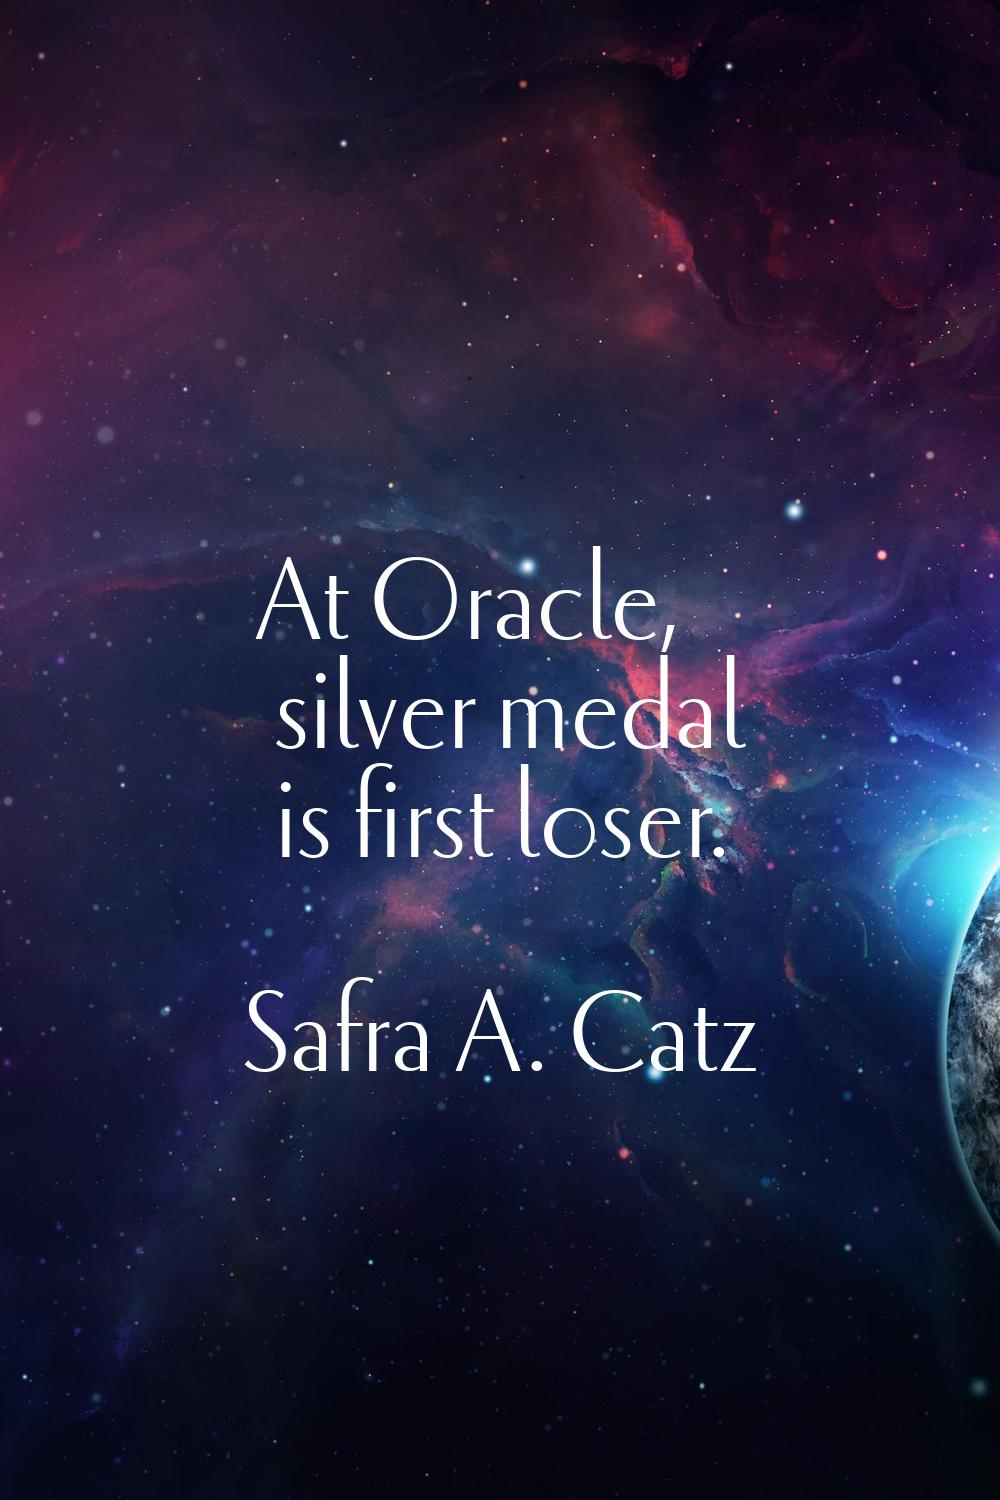 At Oracle, silver medal is first loser.